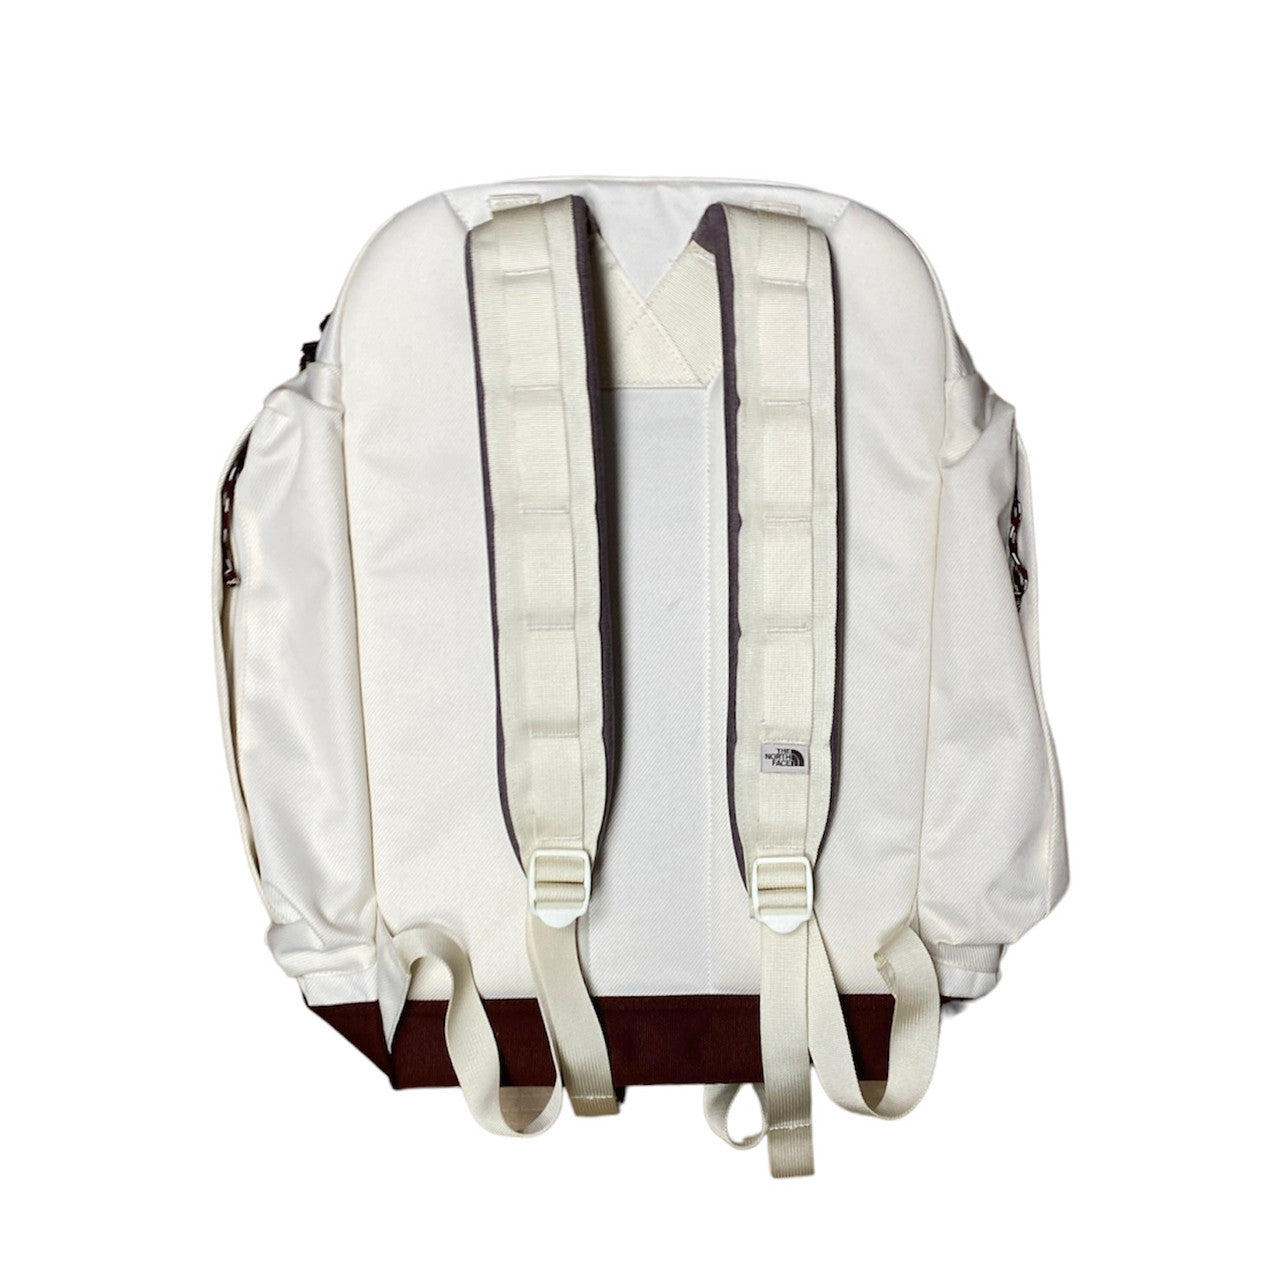 The North Face Ruthsac Laptop Backpack